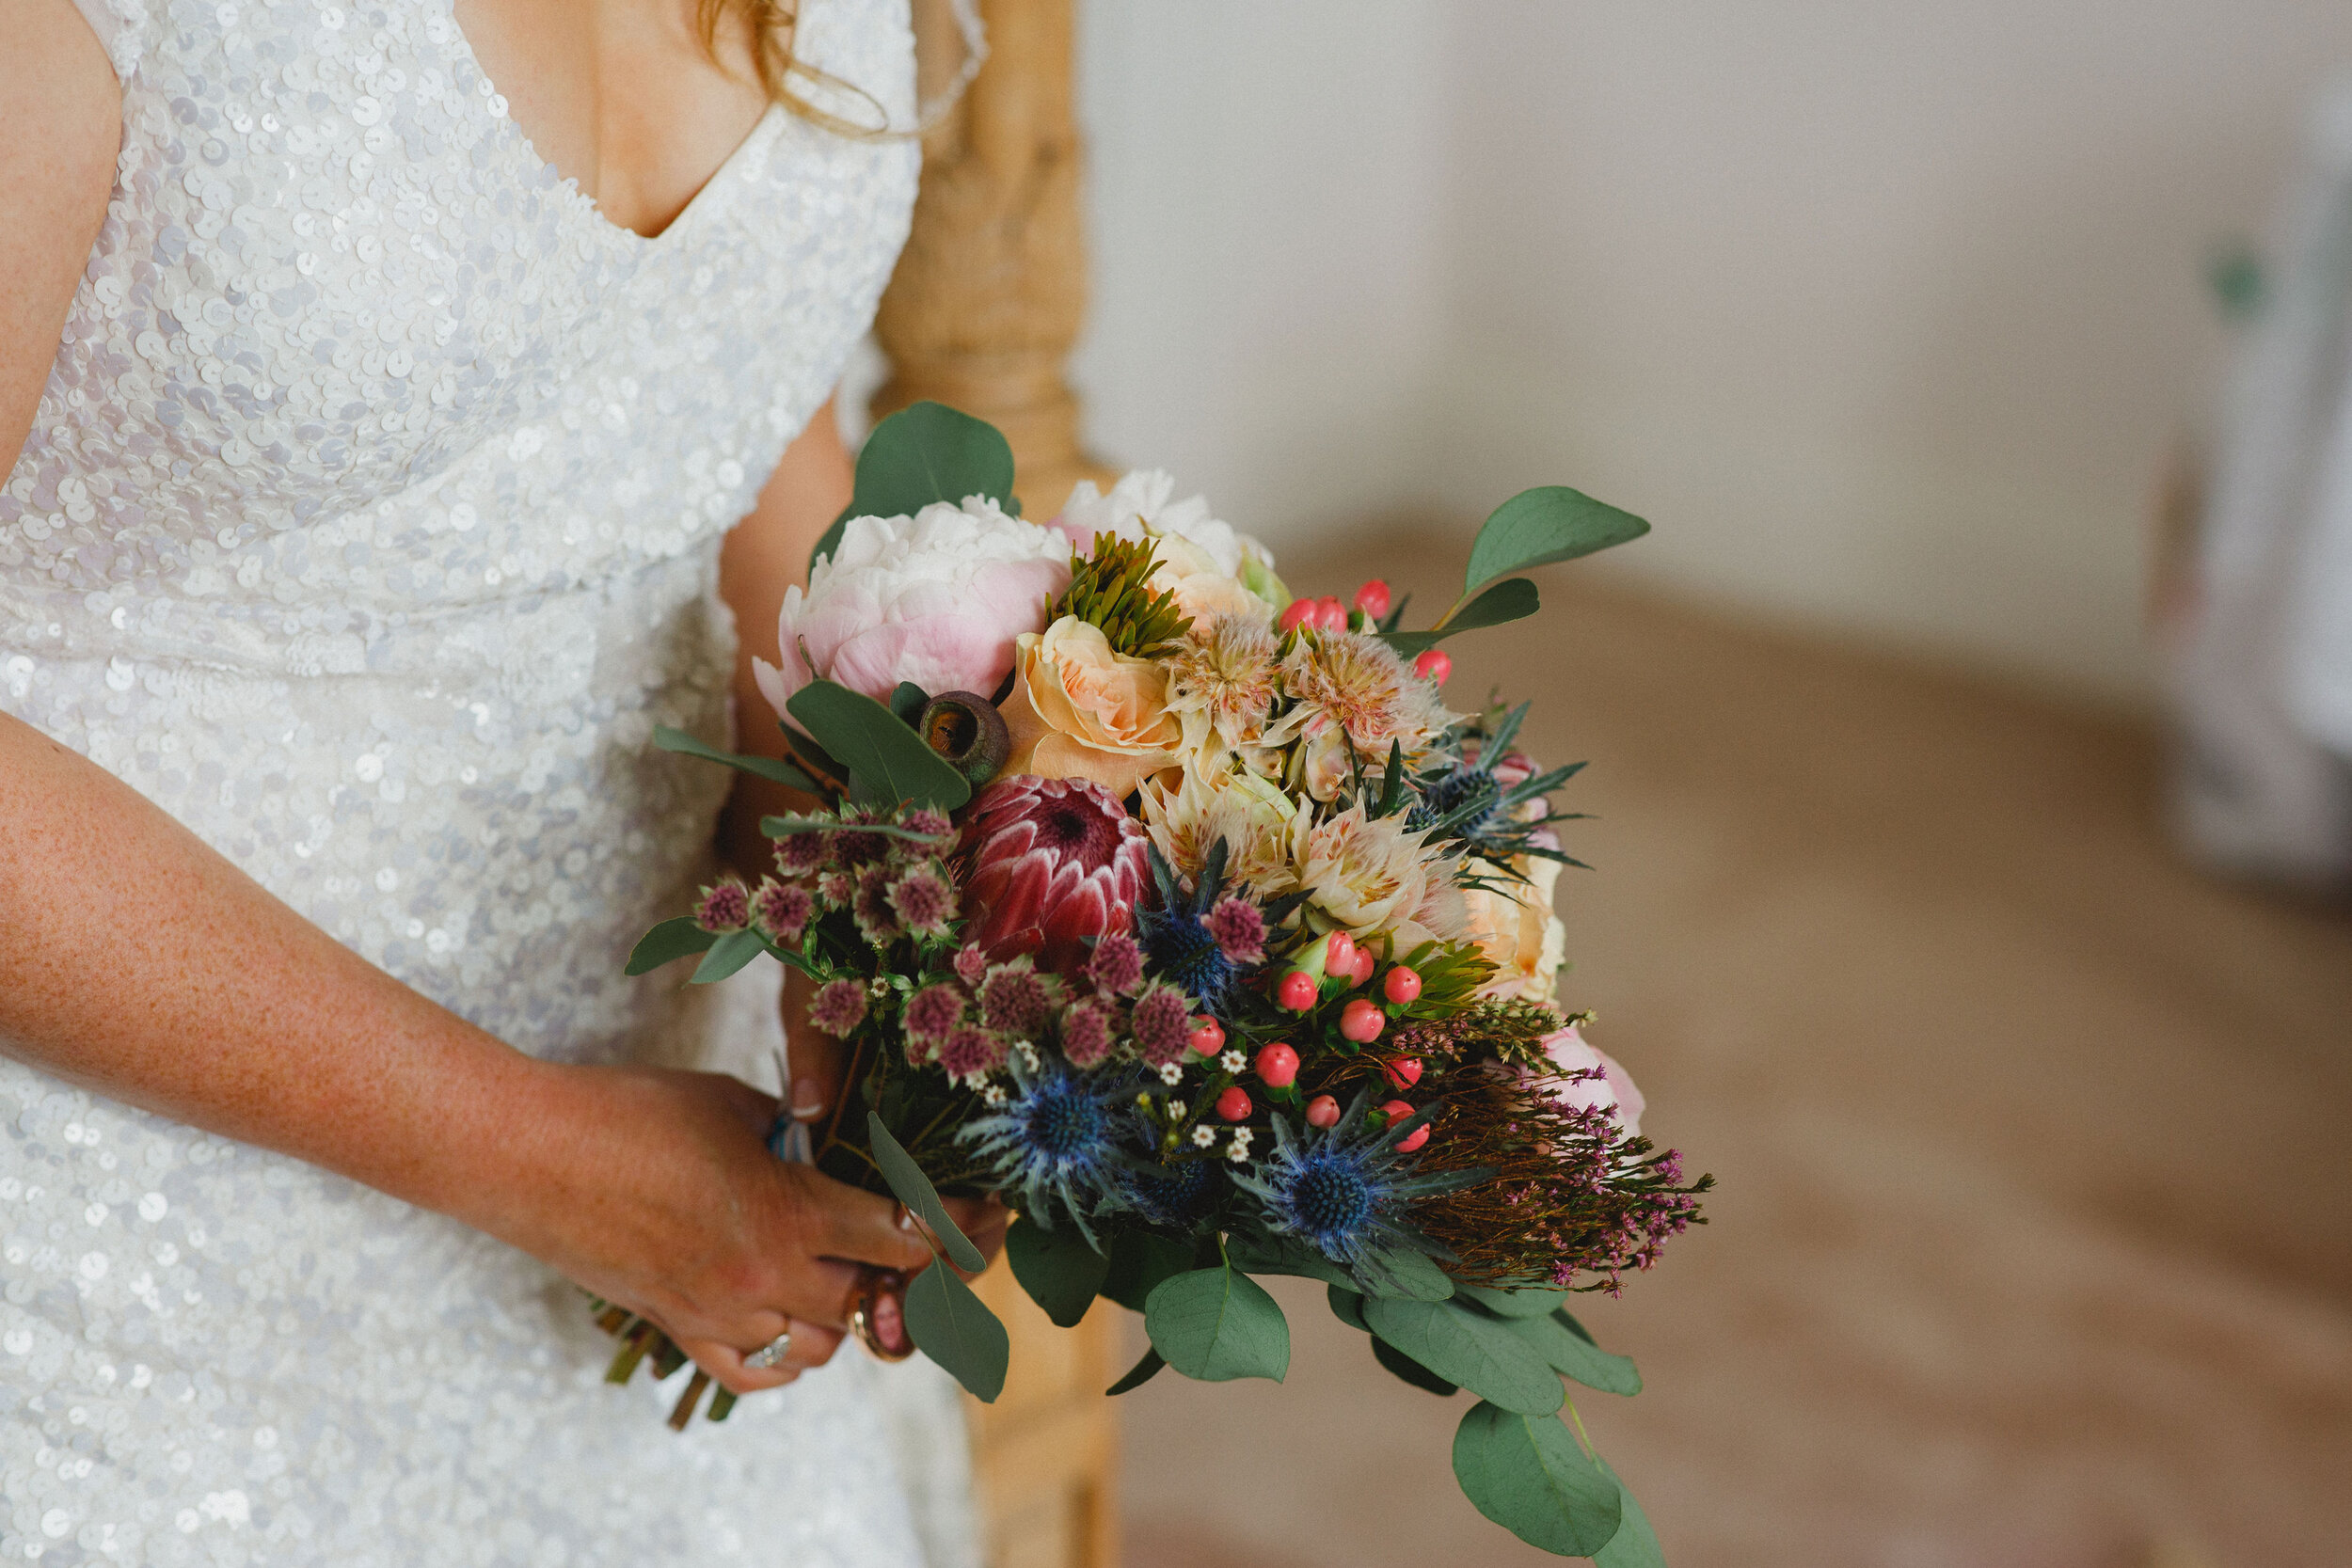 Bride holding beautiful bridal bouquet of berries, protean eryngium, peonies and mixed roses at Strathallan Castle